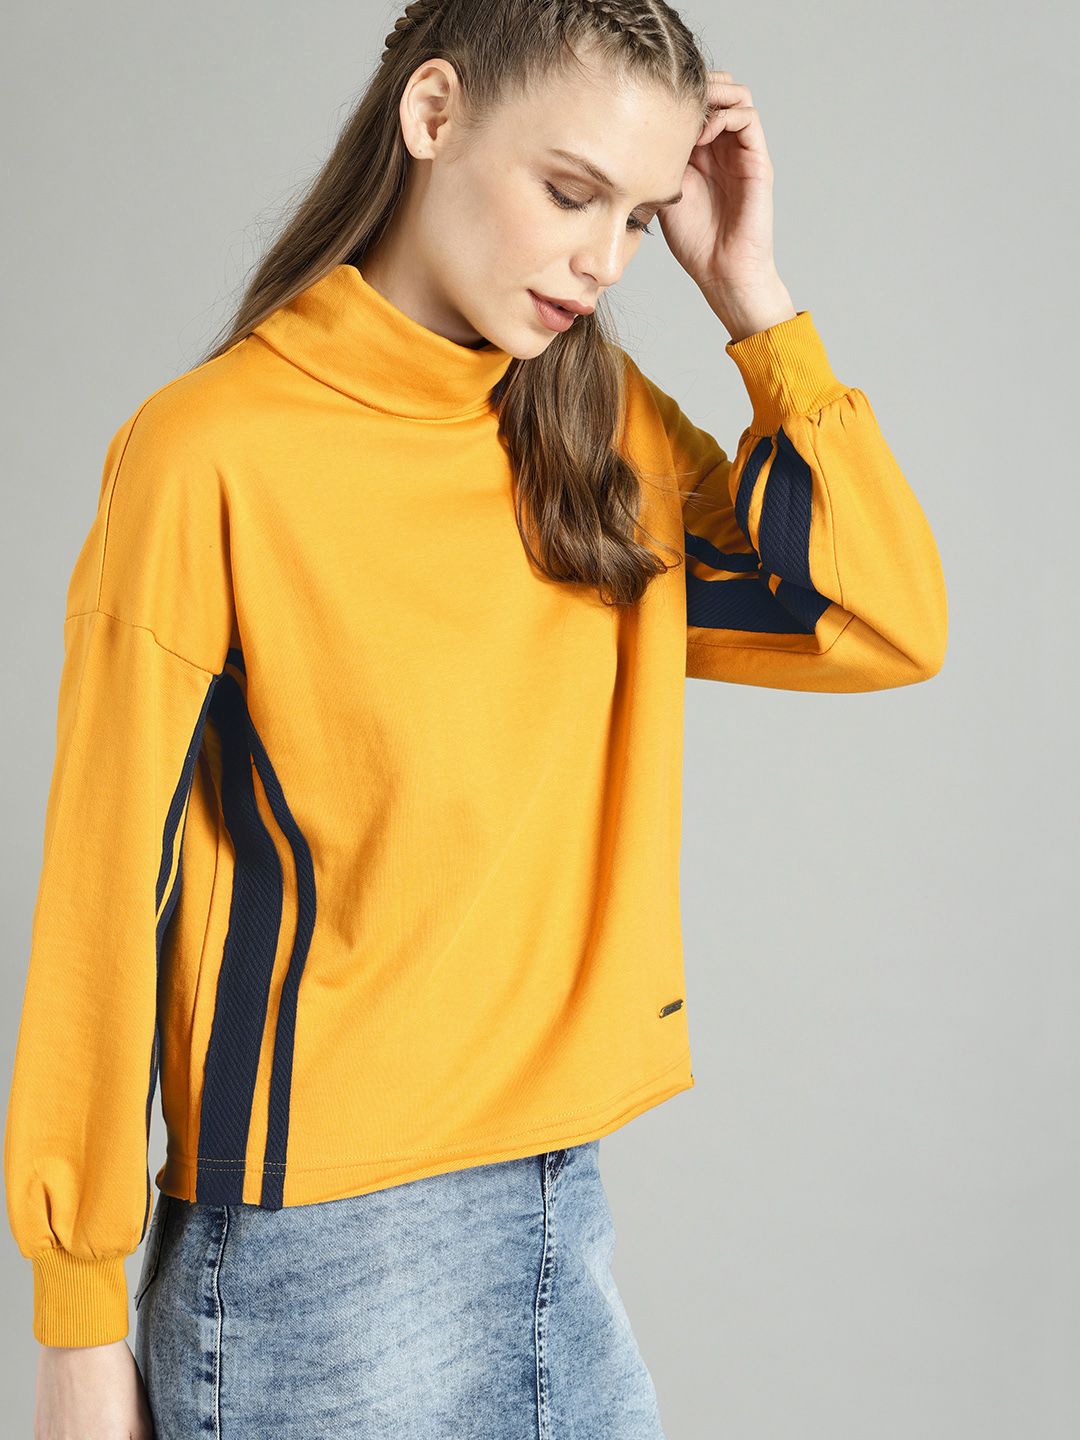 The Roadster Lifestyle Co Women Mustard Yellow Solid Sweatshirt Price in India